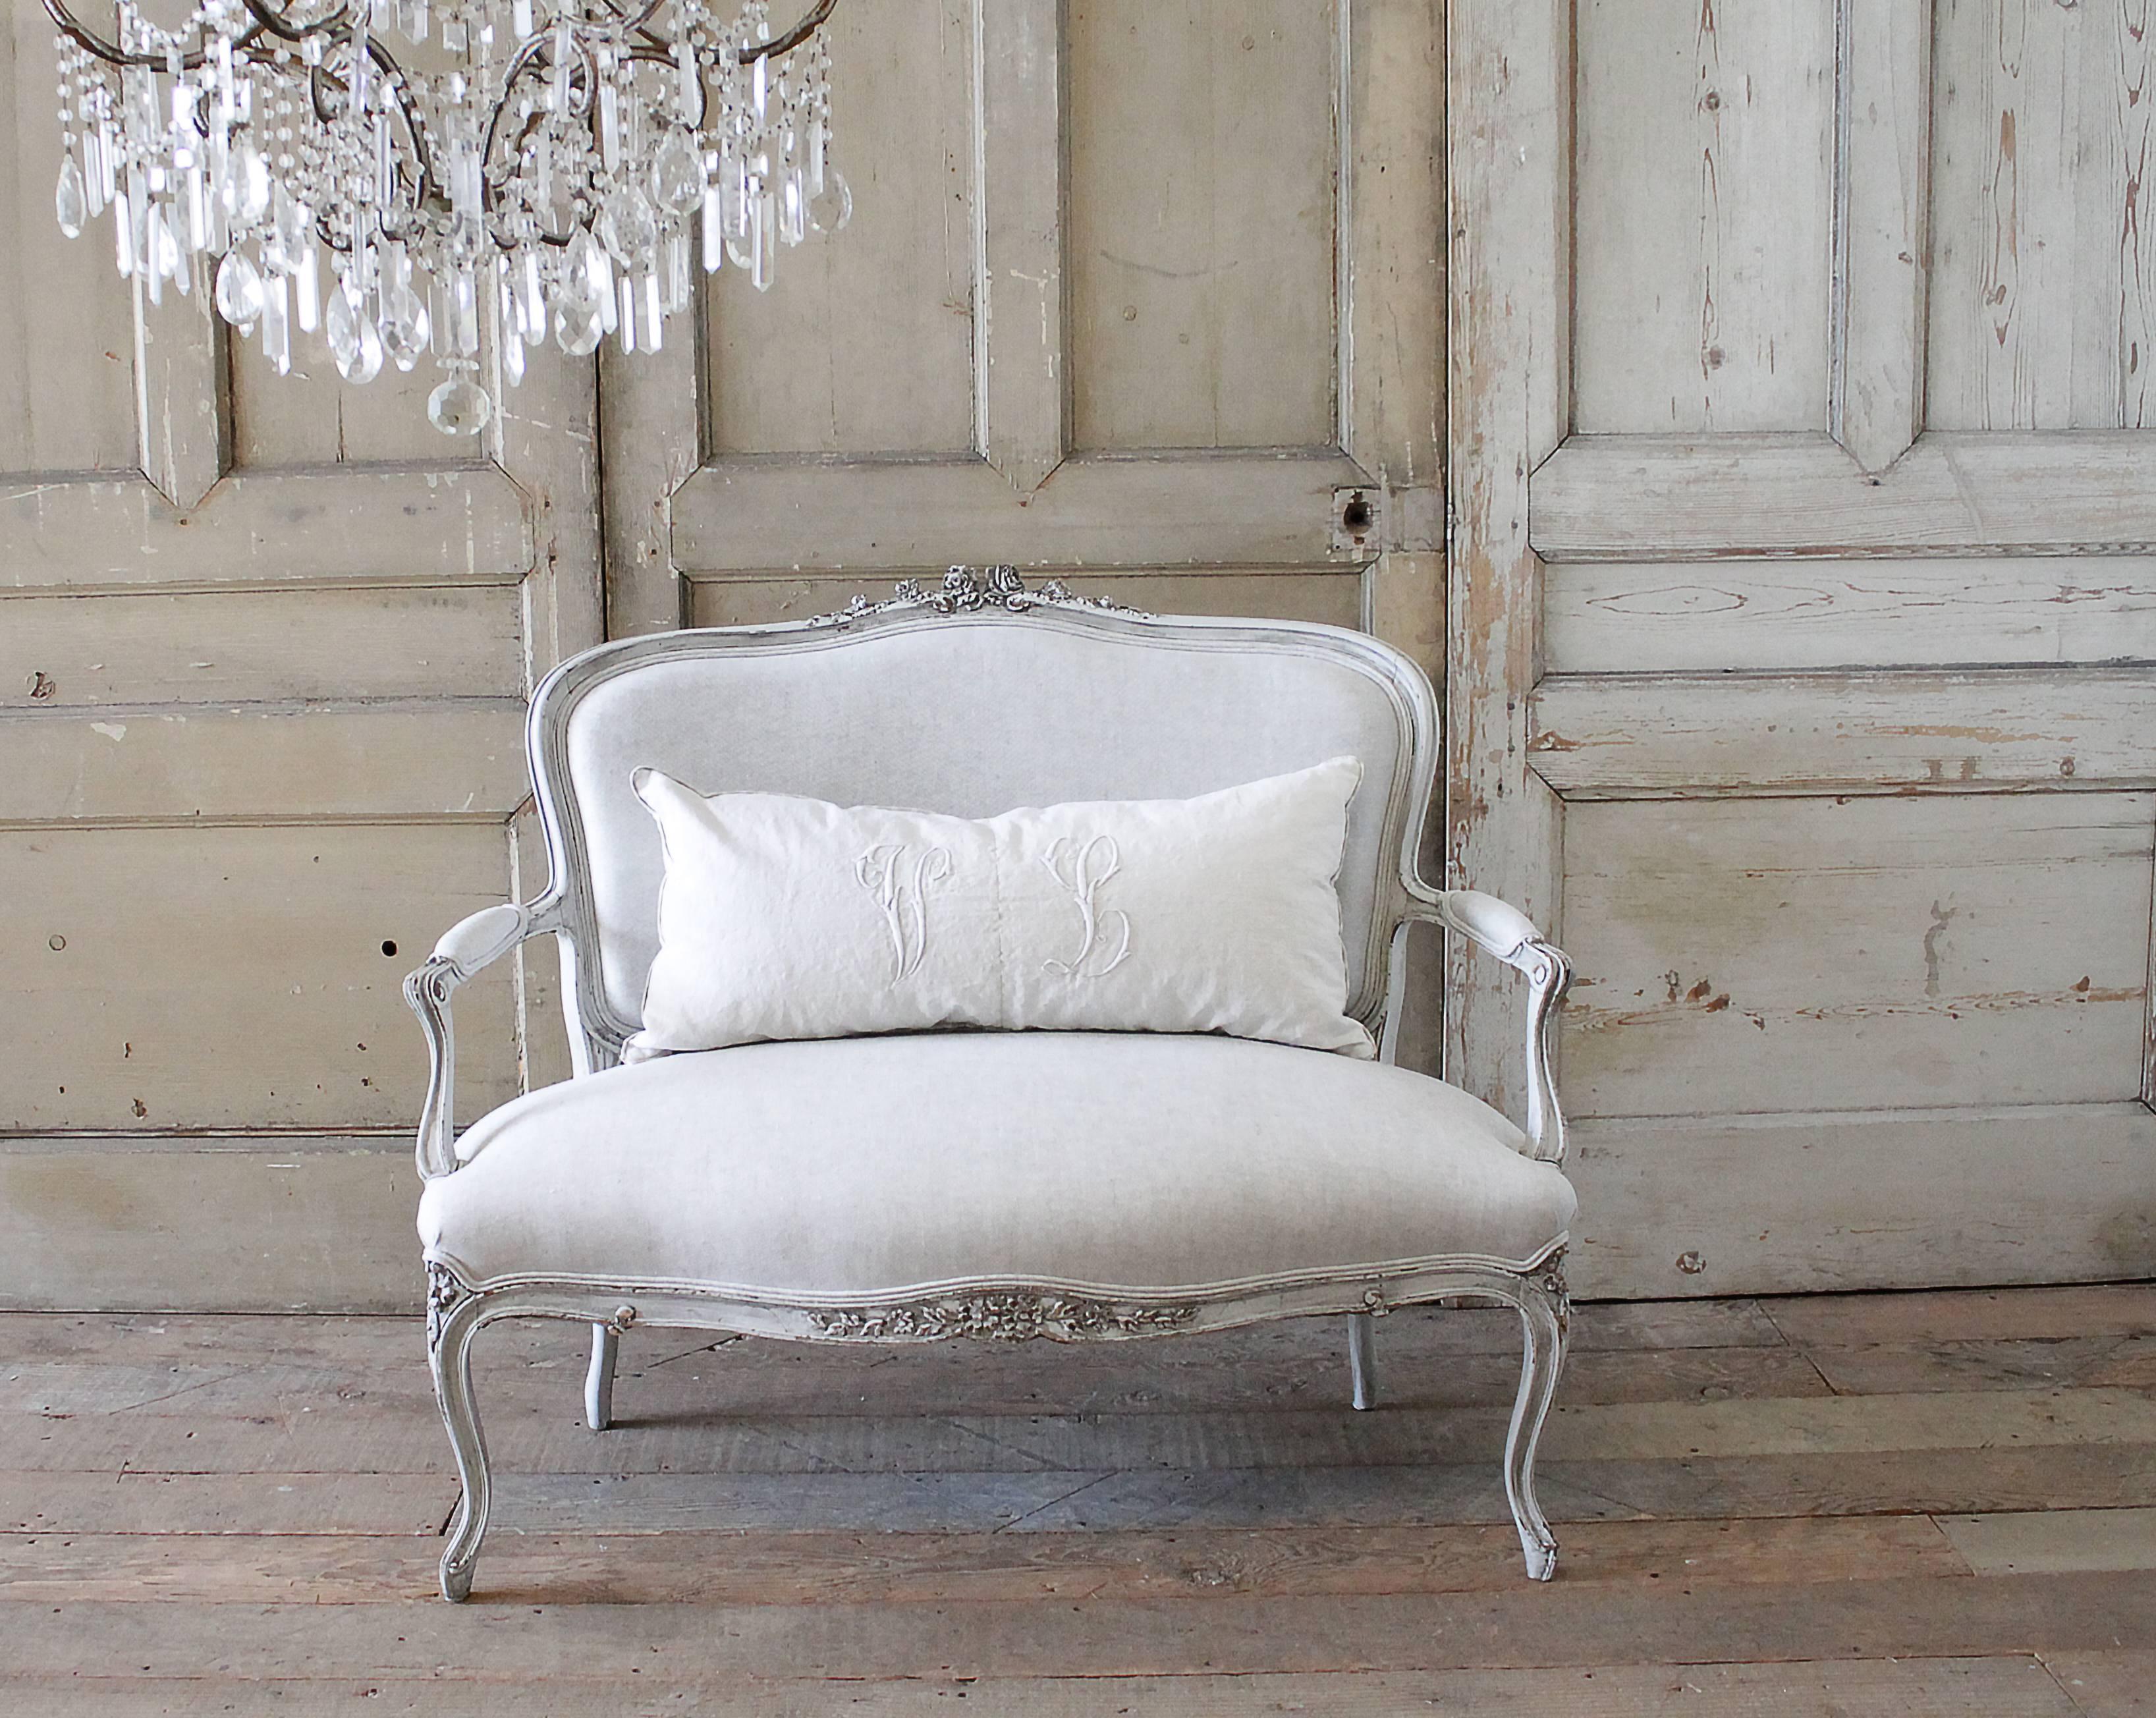 Beautiful settee with large hand-carved roses and floral decorations, we have painted this in our signature oyster white with a soft muted antique glaze, giving the paint a grey tone while enhancing the carvings. Slightly distressed, this settee is